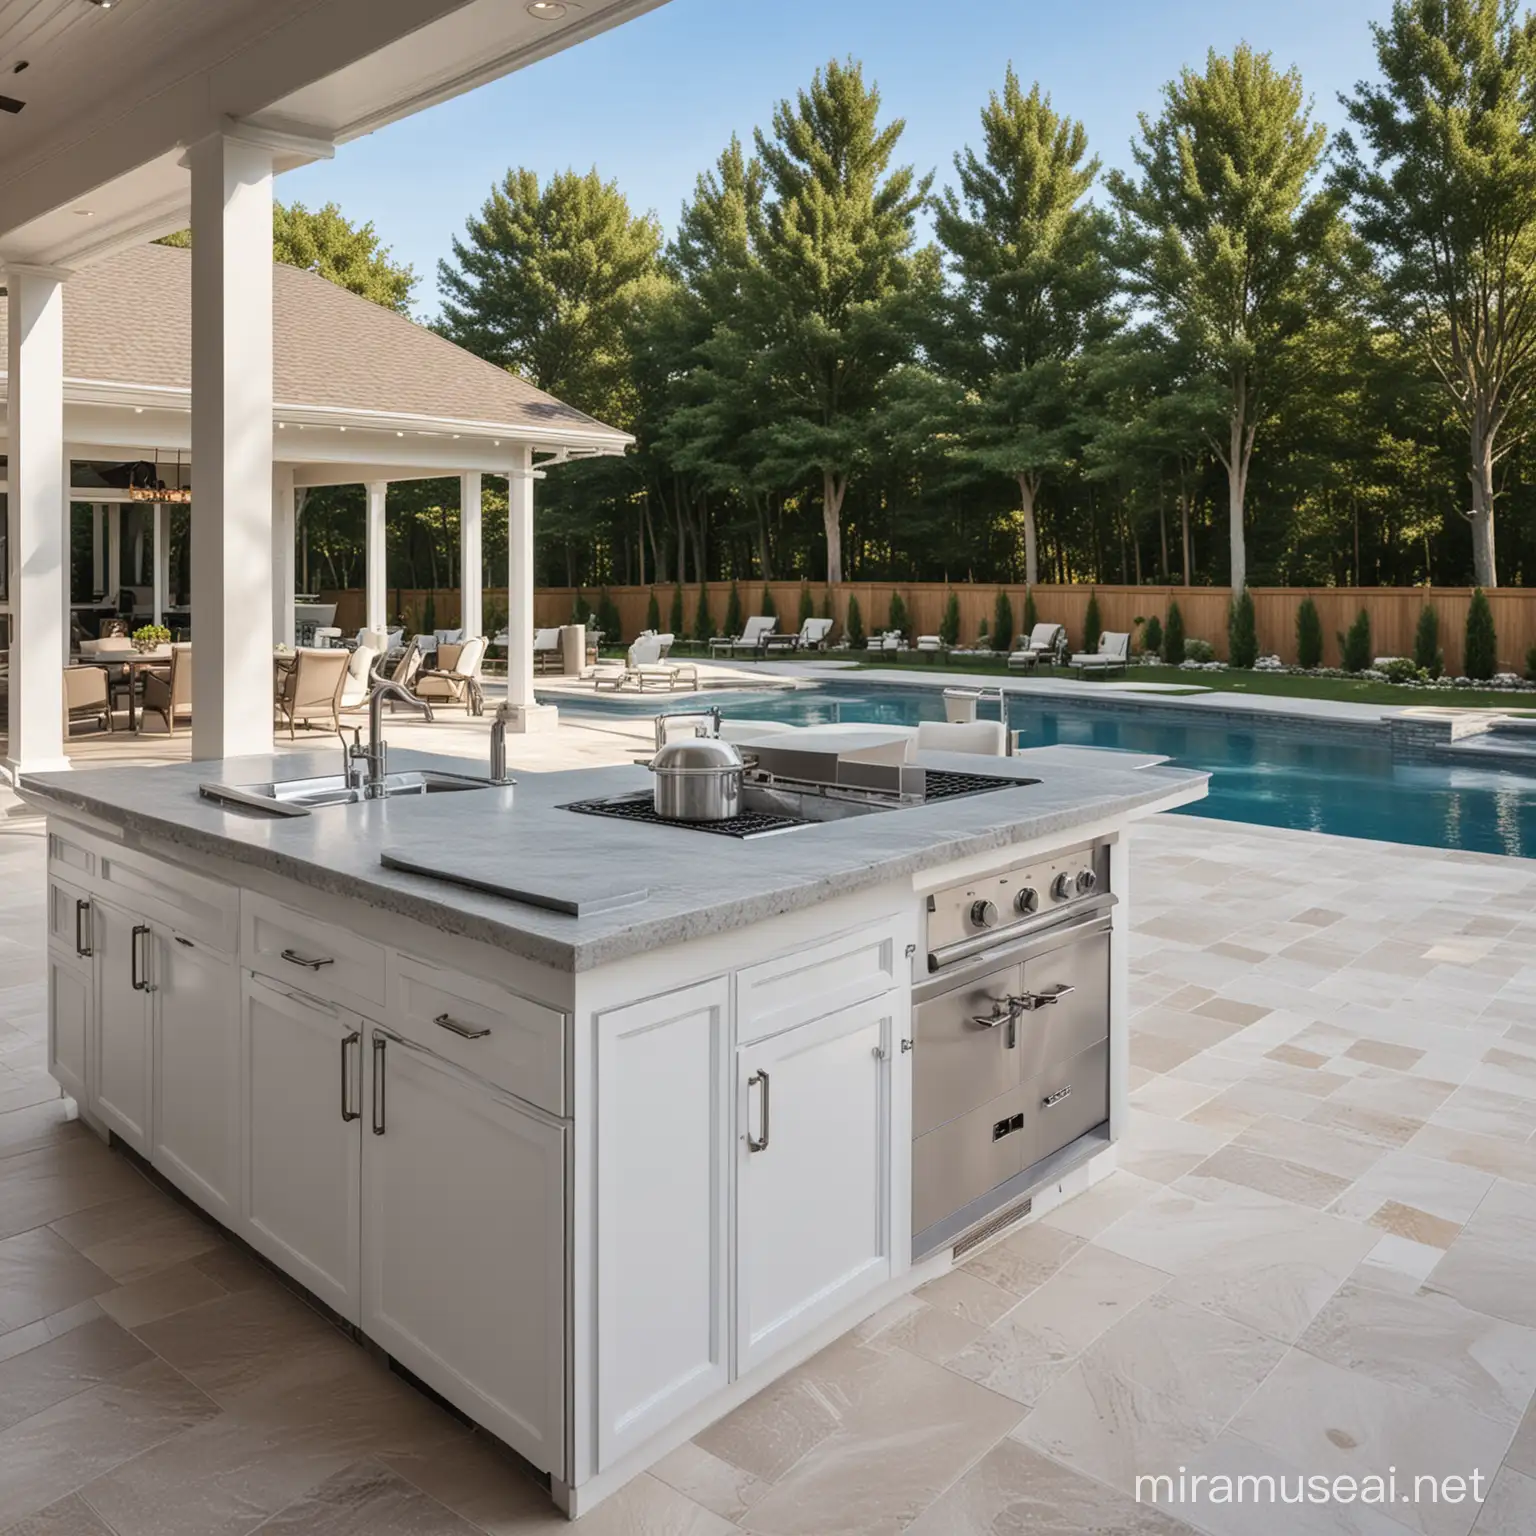 Luxurious Outdoor Grill Area with White Laminate Cabinets and Poolside Seating